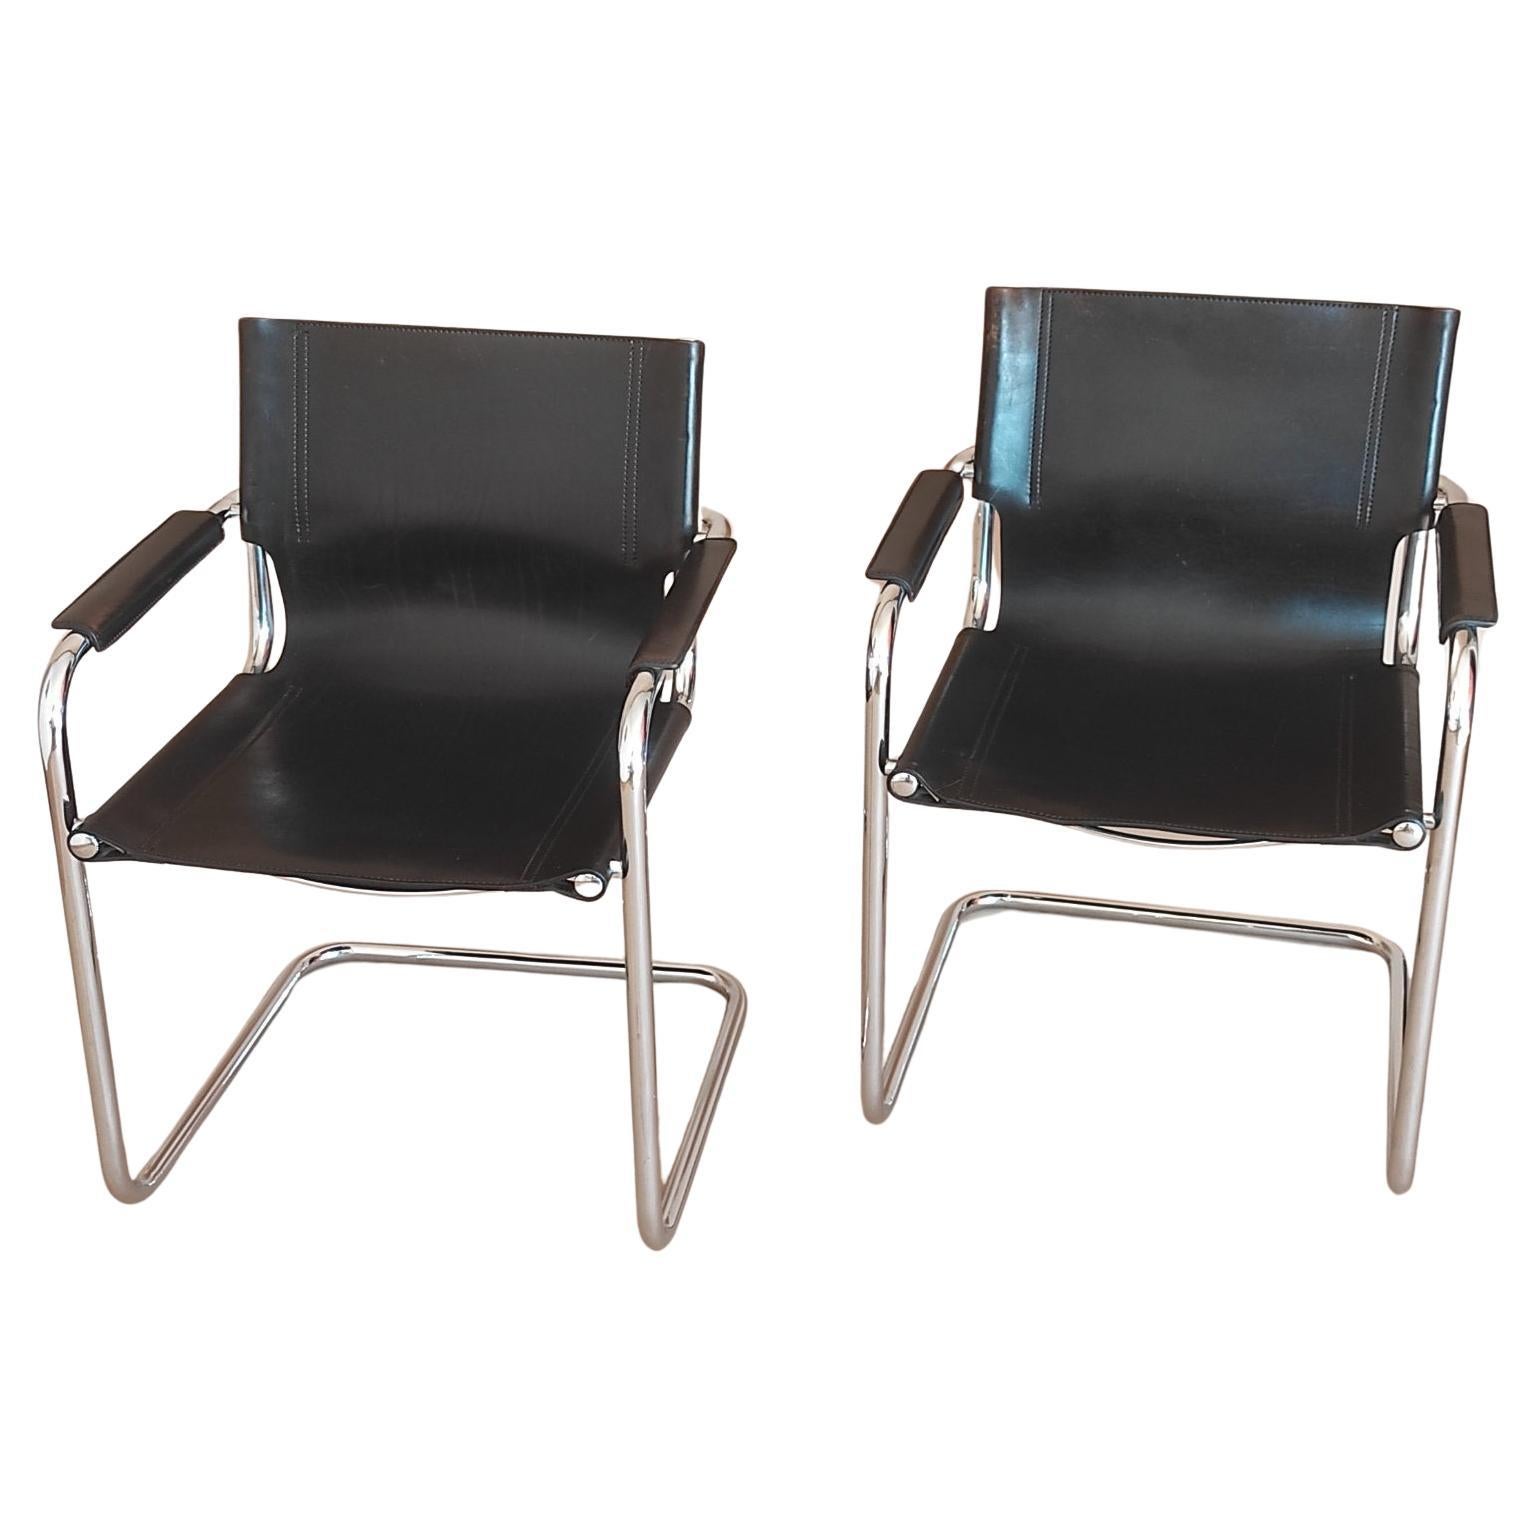 Set of Two Vintage Leather Cantilever Chair By FASEM Italy 1980s For Sale